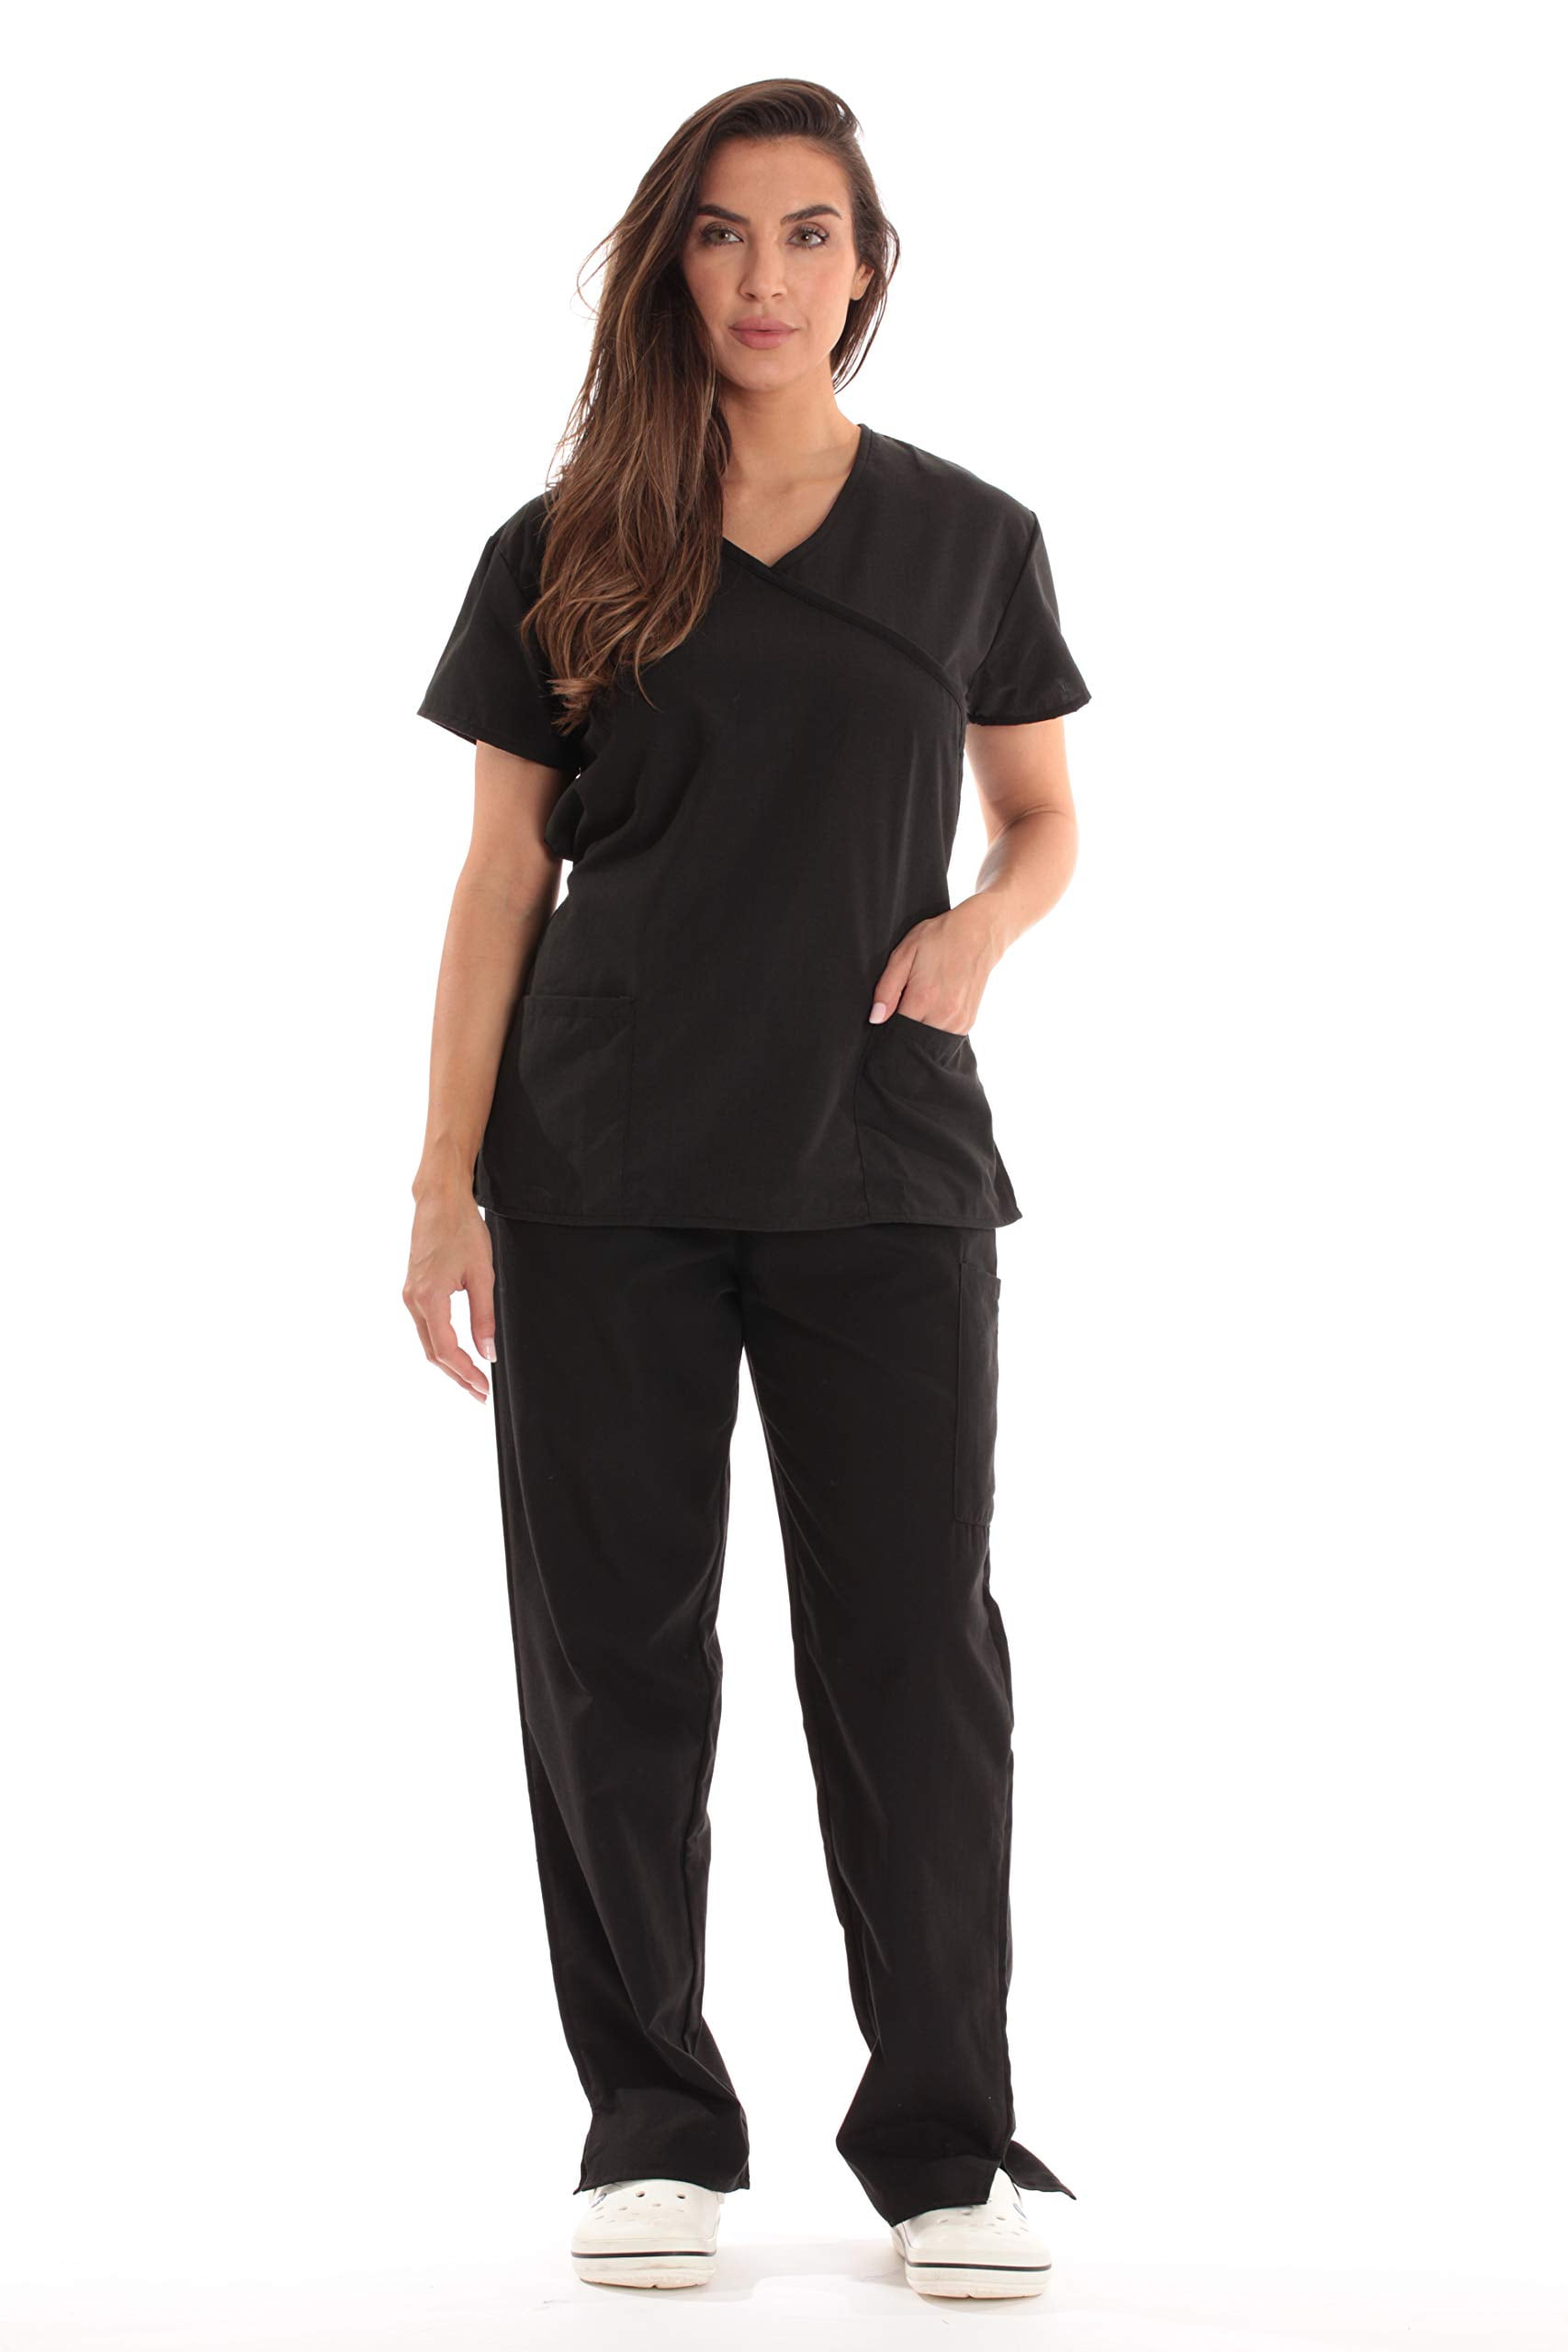 Just Love Women's Scrub Sets Medical Scrubs (Mock Wrap) - Comfortable and  Professional Uniform in (Black with Black Trim, X-Large)